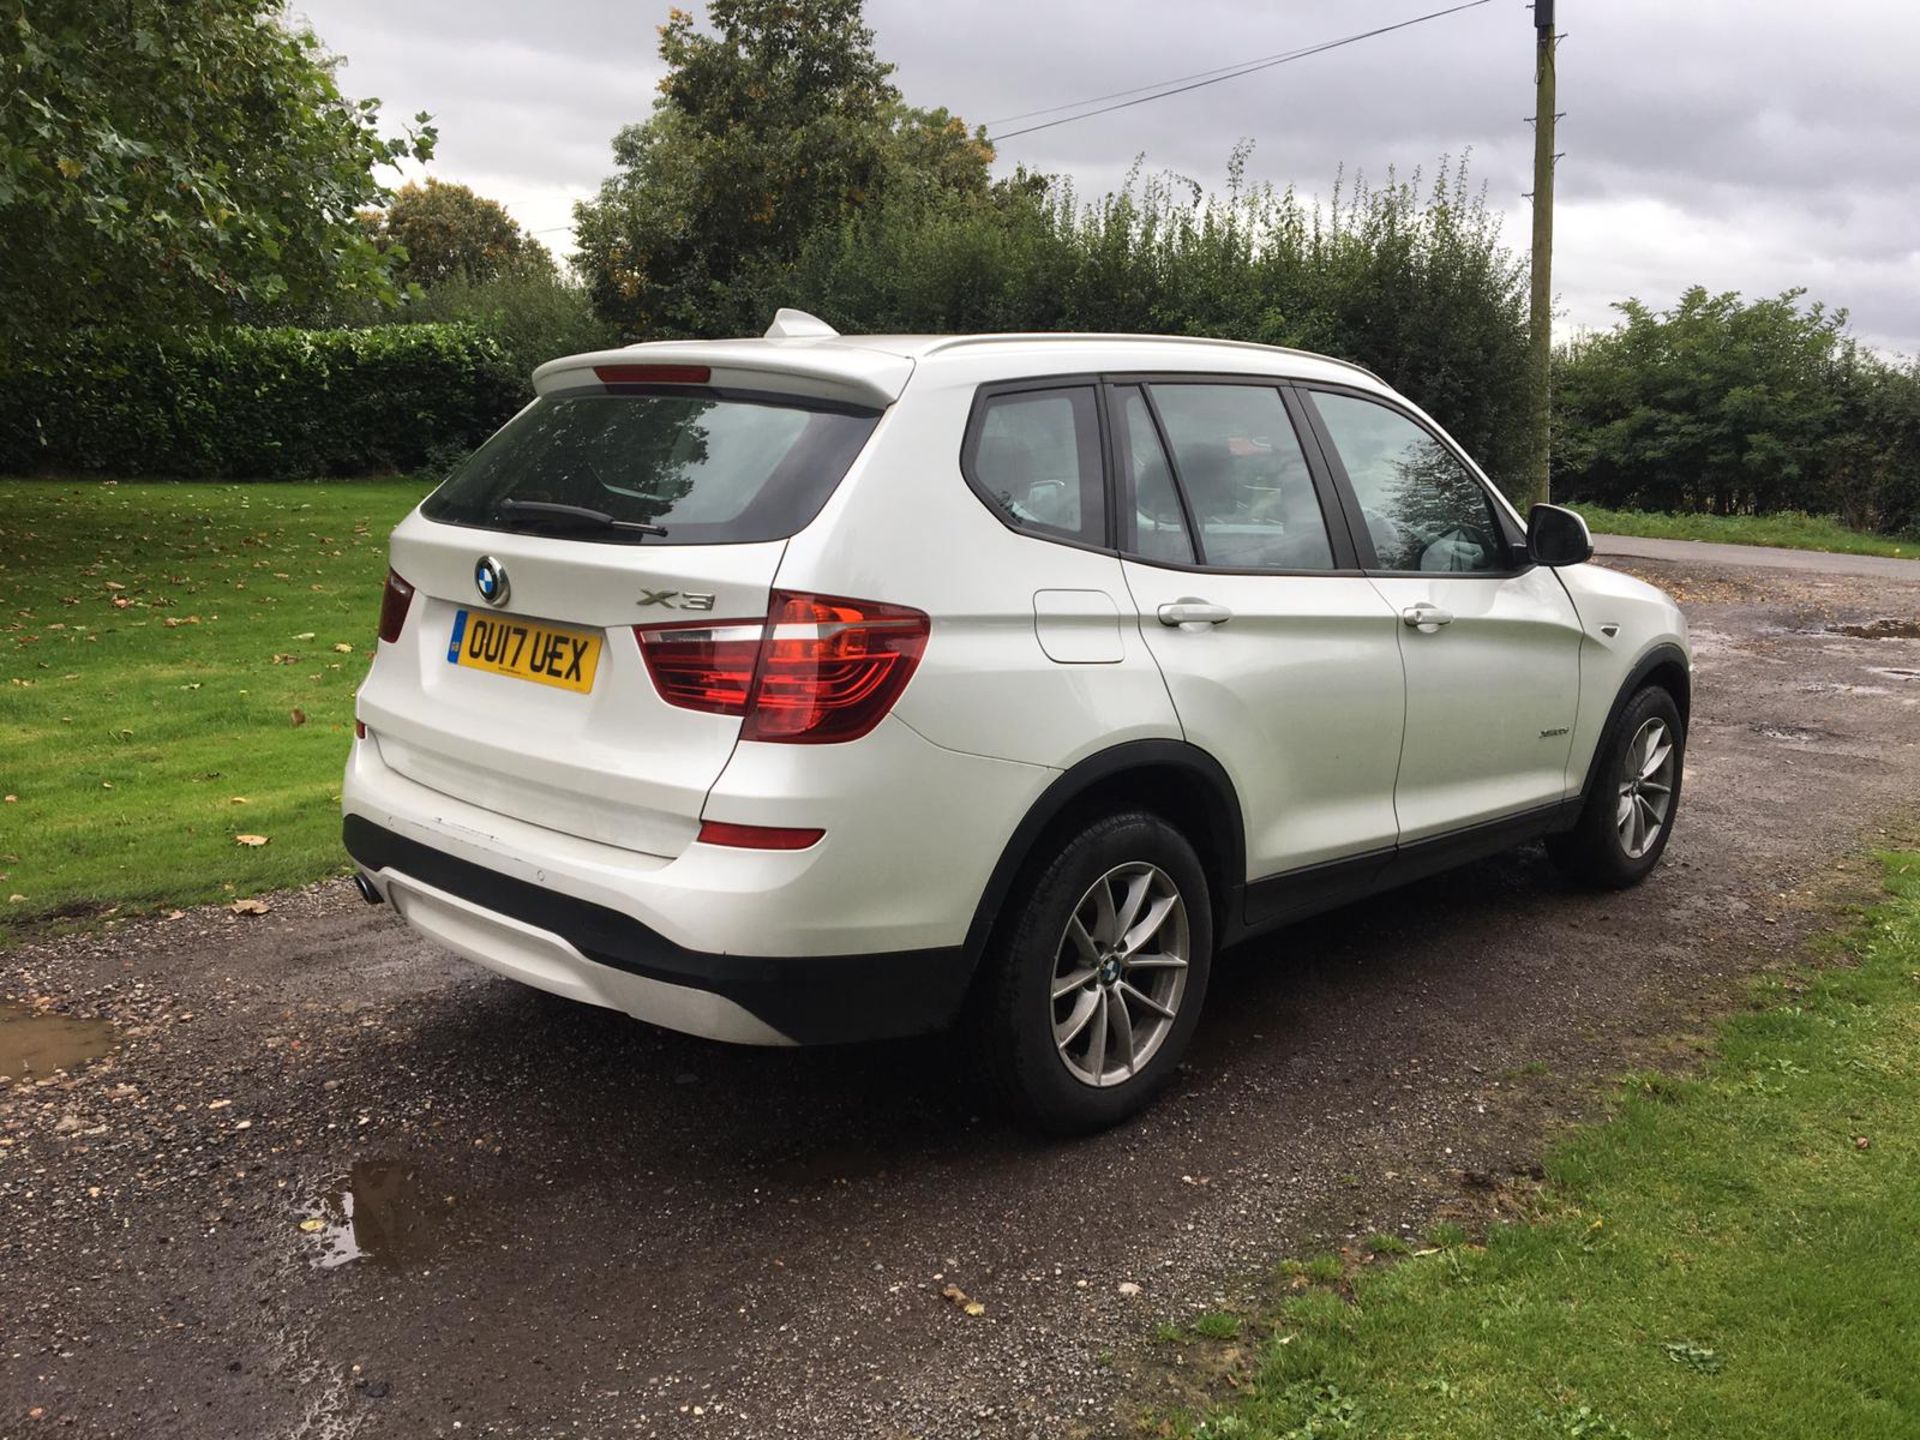 2017/17 REG BMW X3 XDRIVE 20D SE AUTO 2.0 DIESEL WHITE ESTATE, SHOWING 0 FORMER KEEPERS *NO VAT* - Image 7 of 15